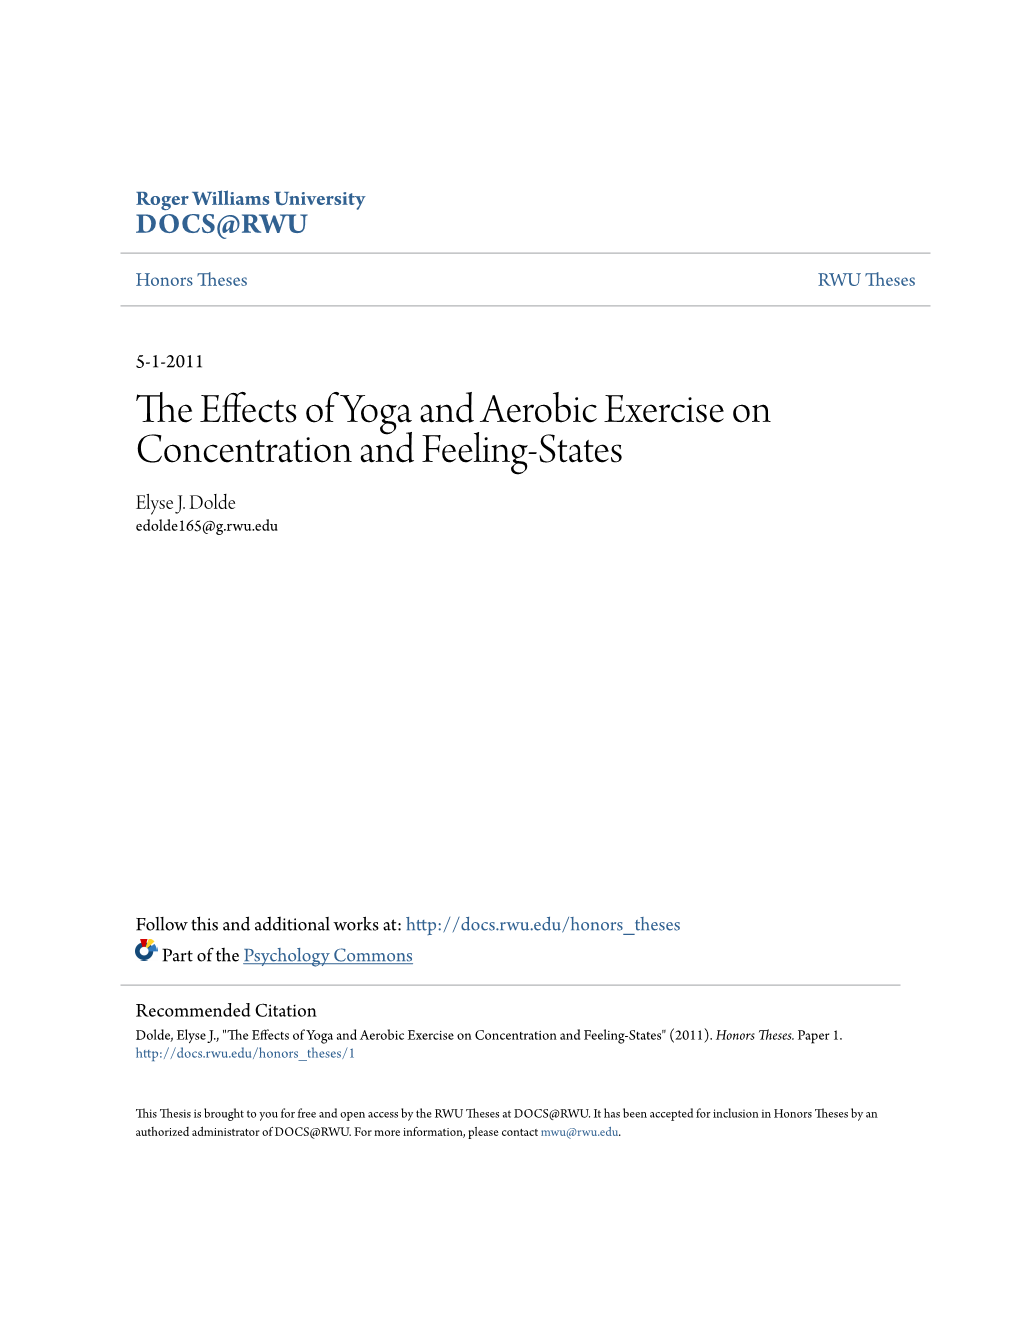 The Effects of Yoga and Aerobic Exercise on Concentration and Feeling-States